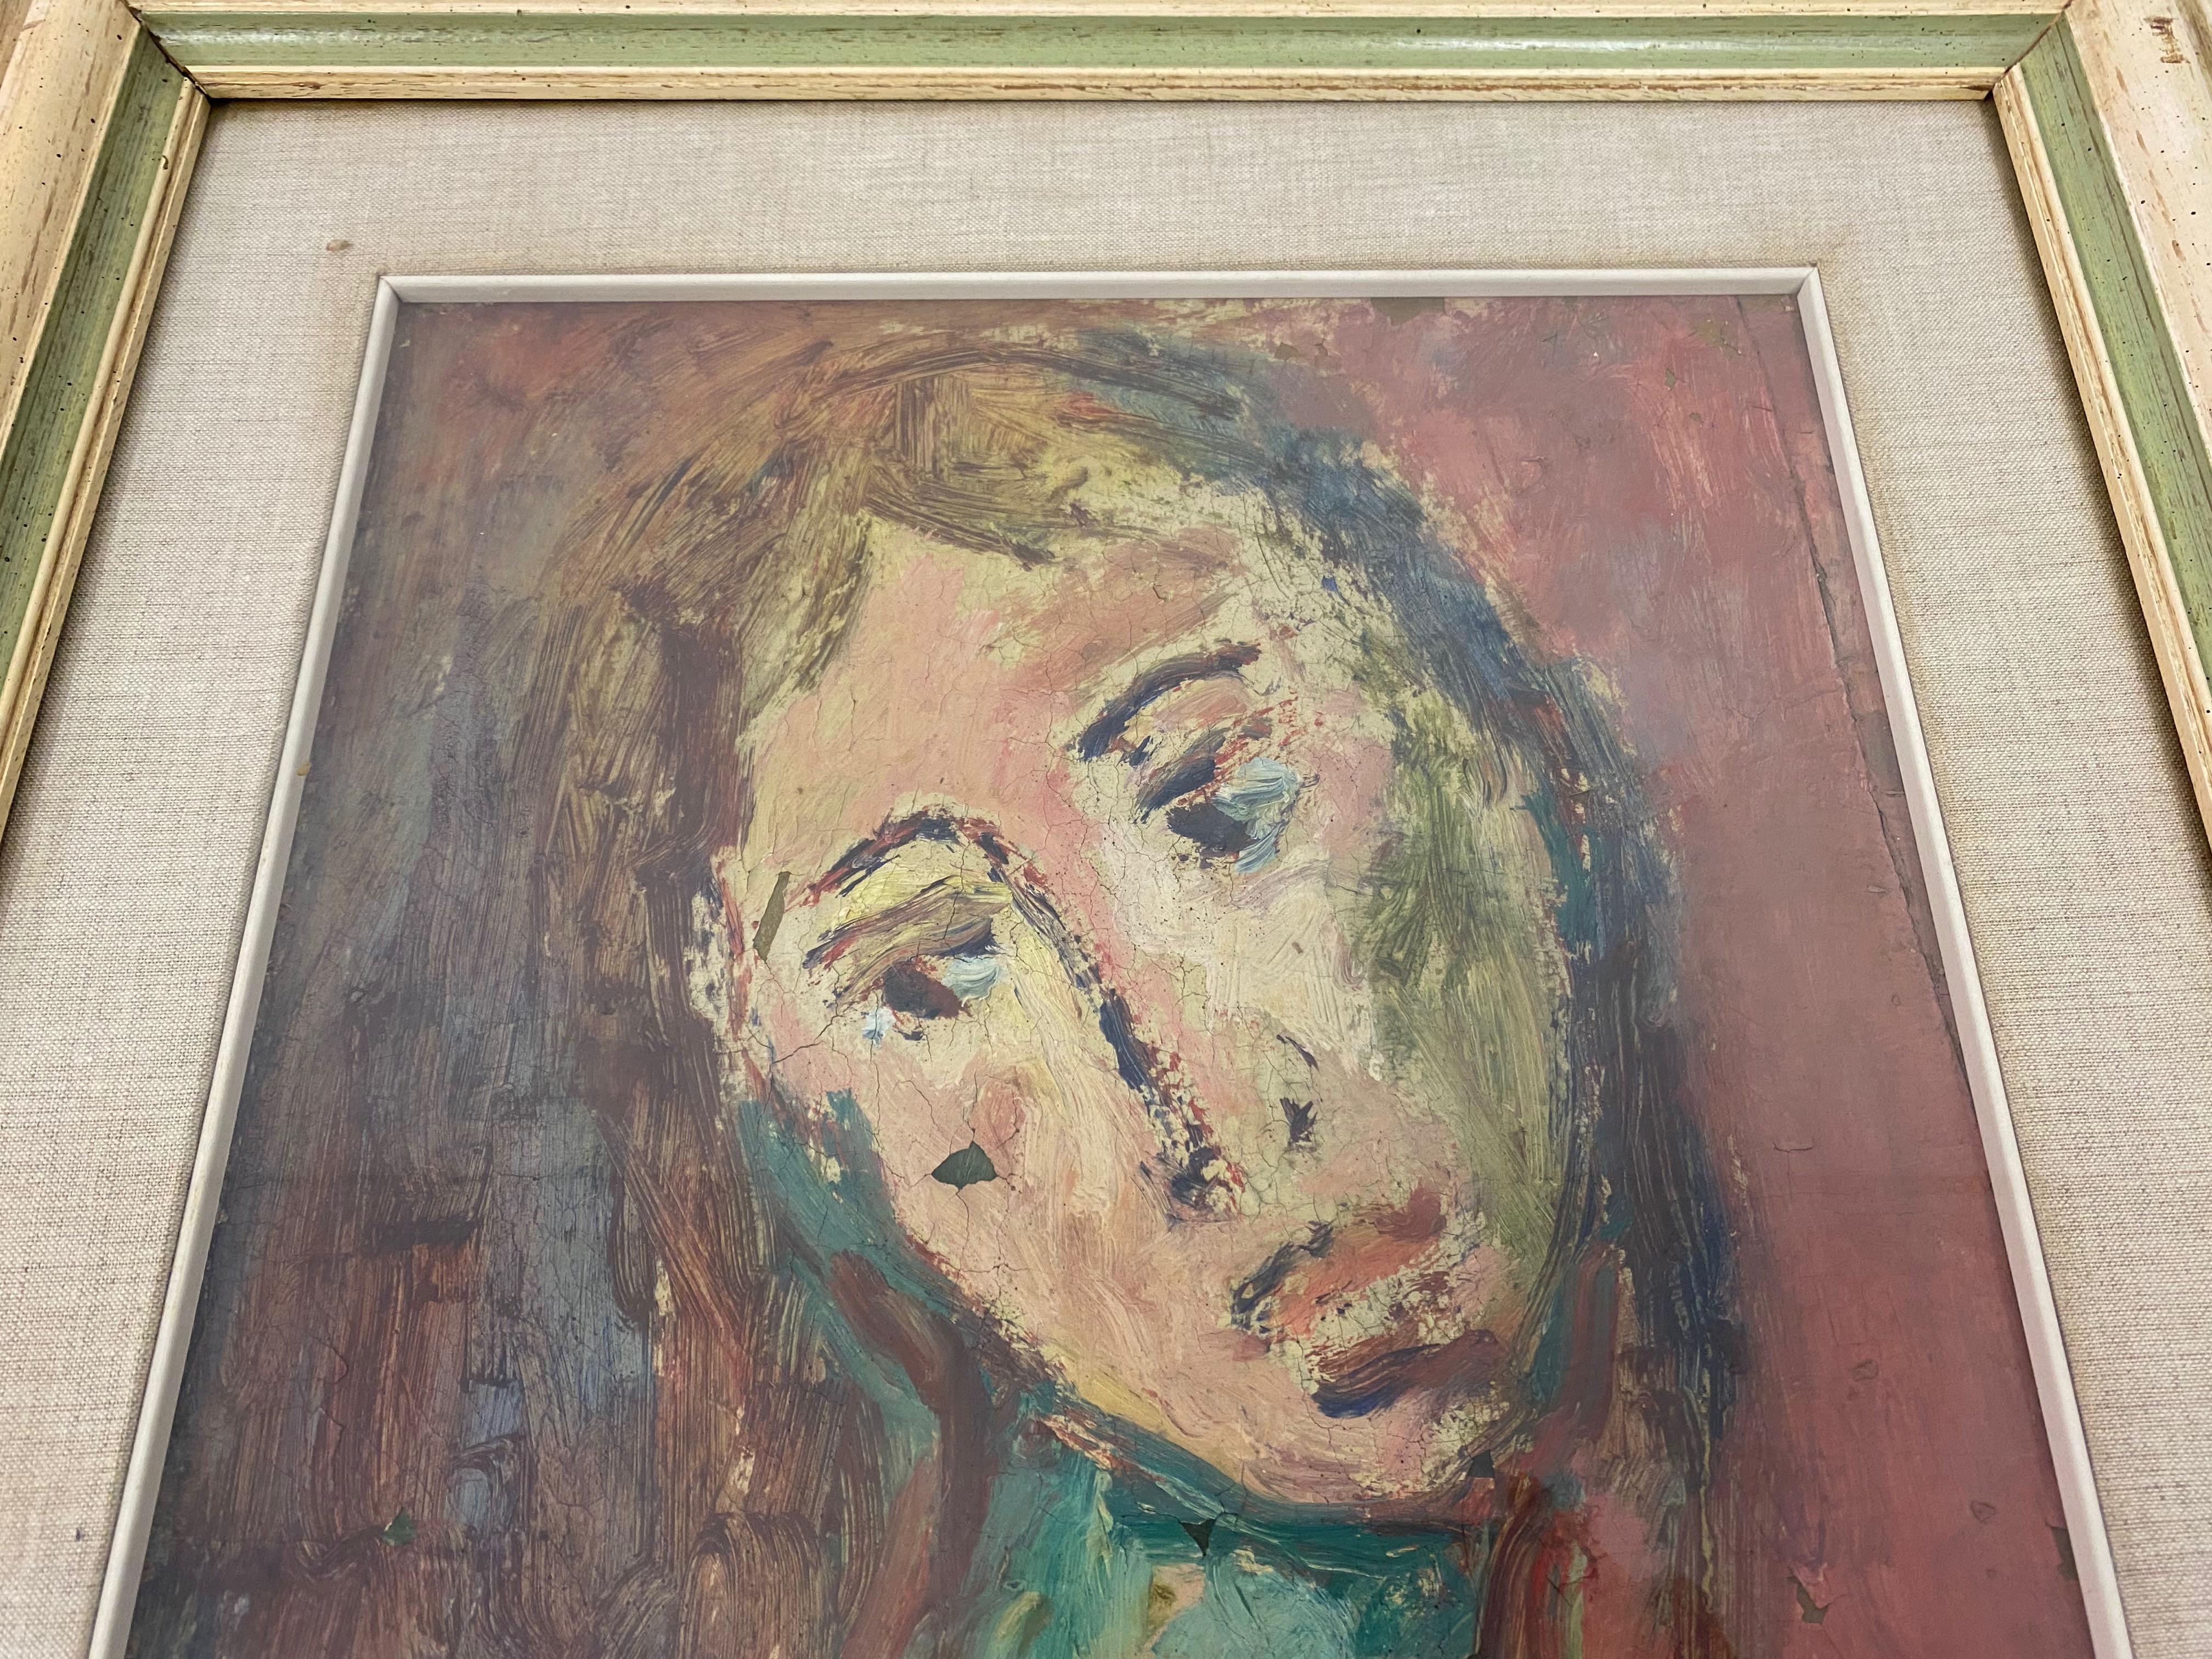 1960s Portrait of a Female In Good Condition For Sale In London, London